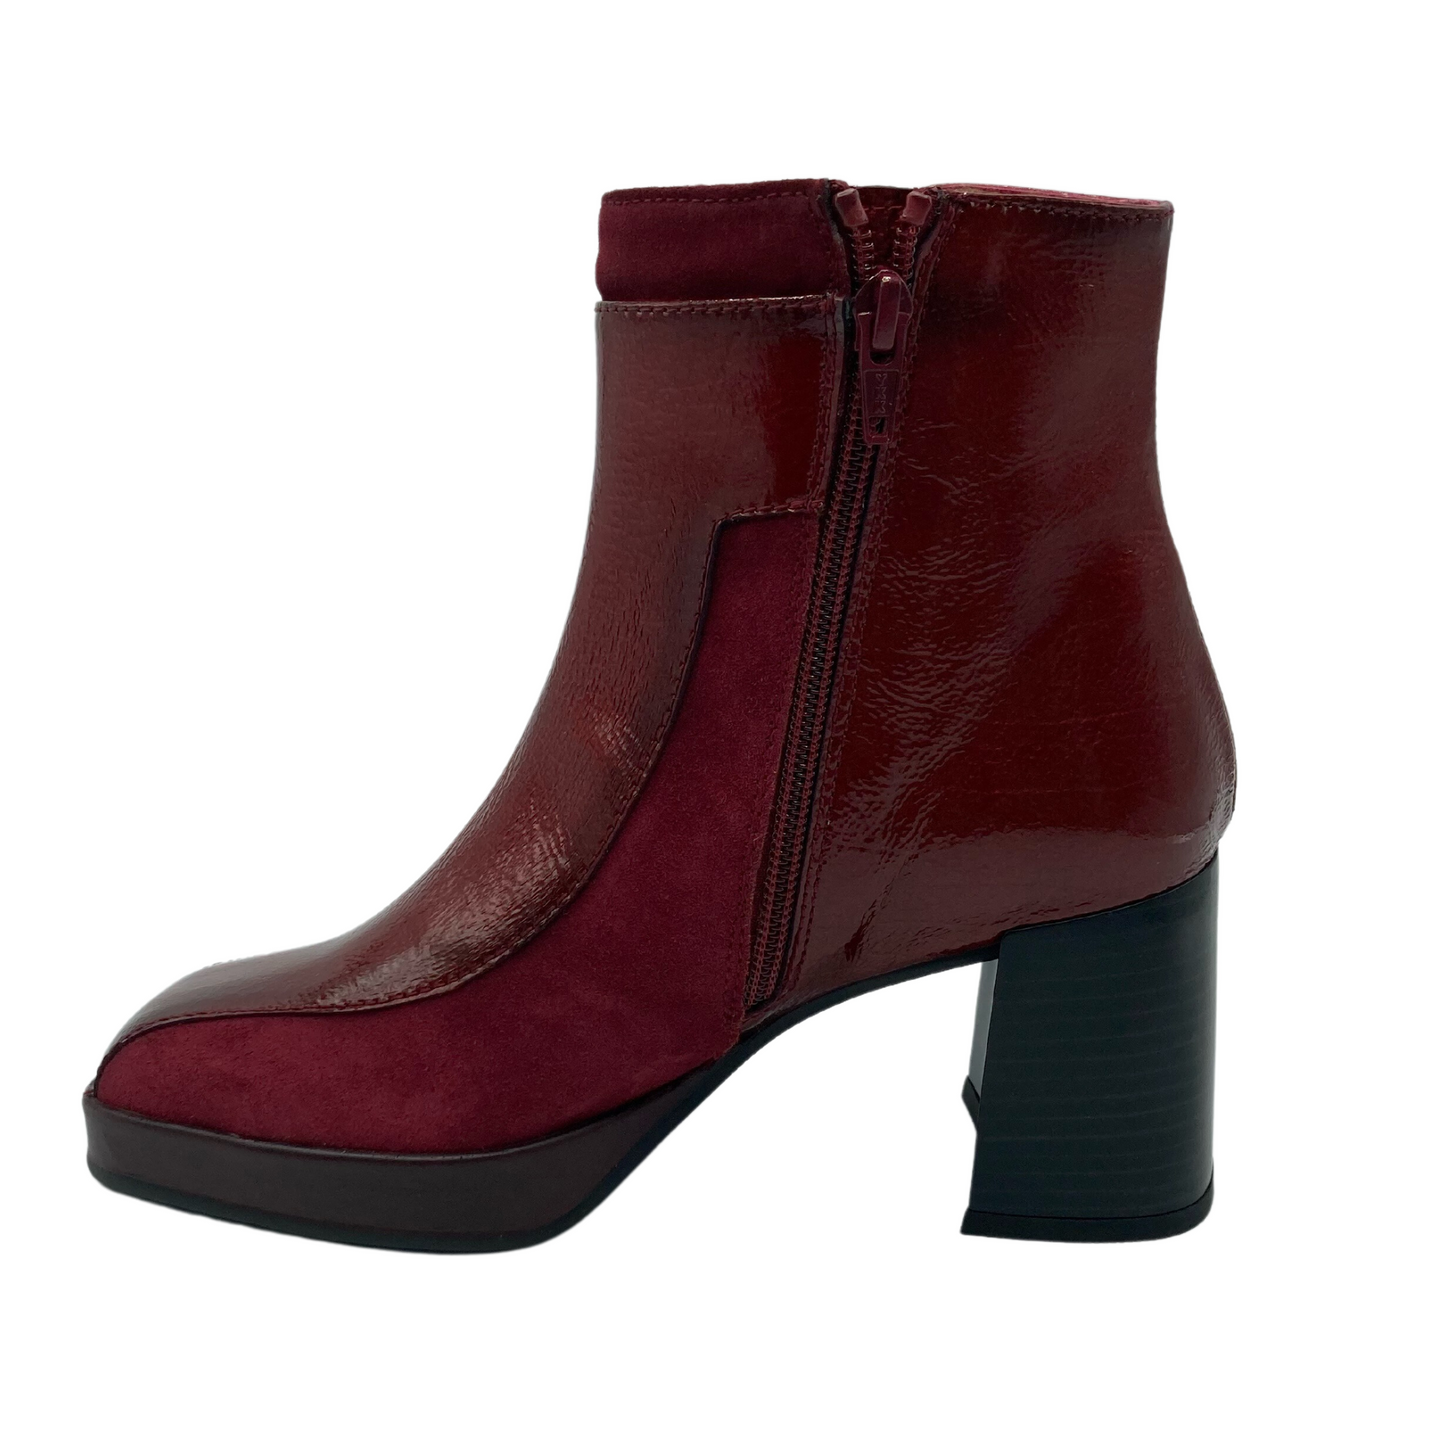 Left facing view of red leather short boot with red zipper closure